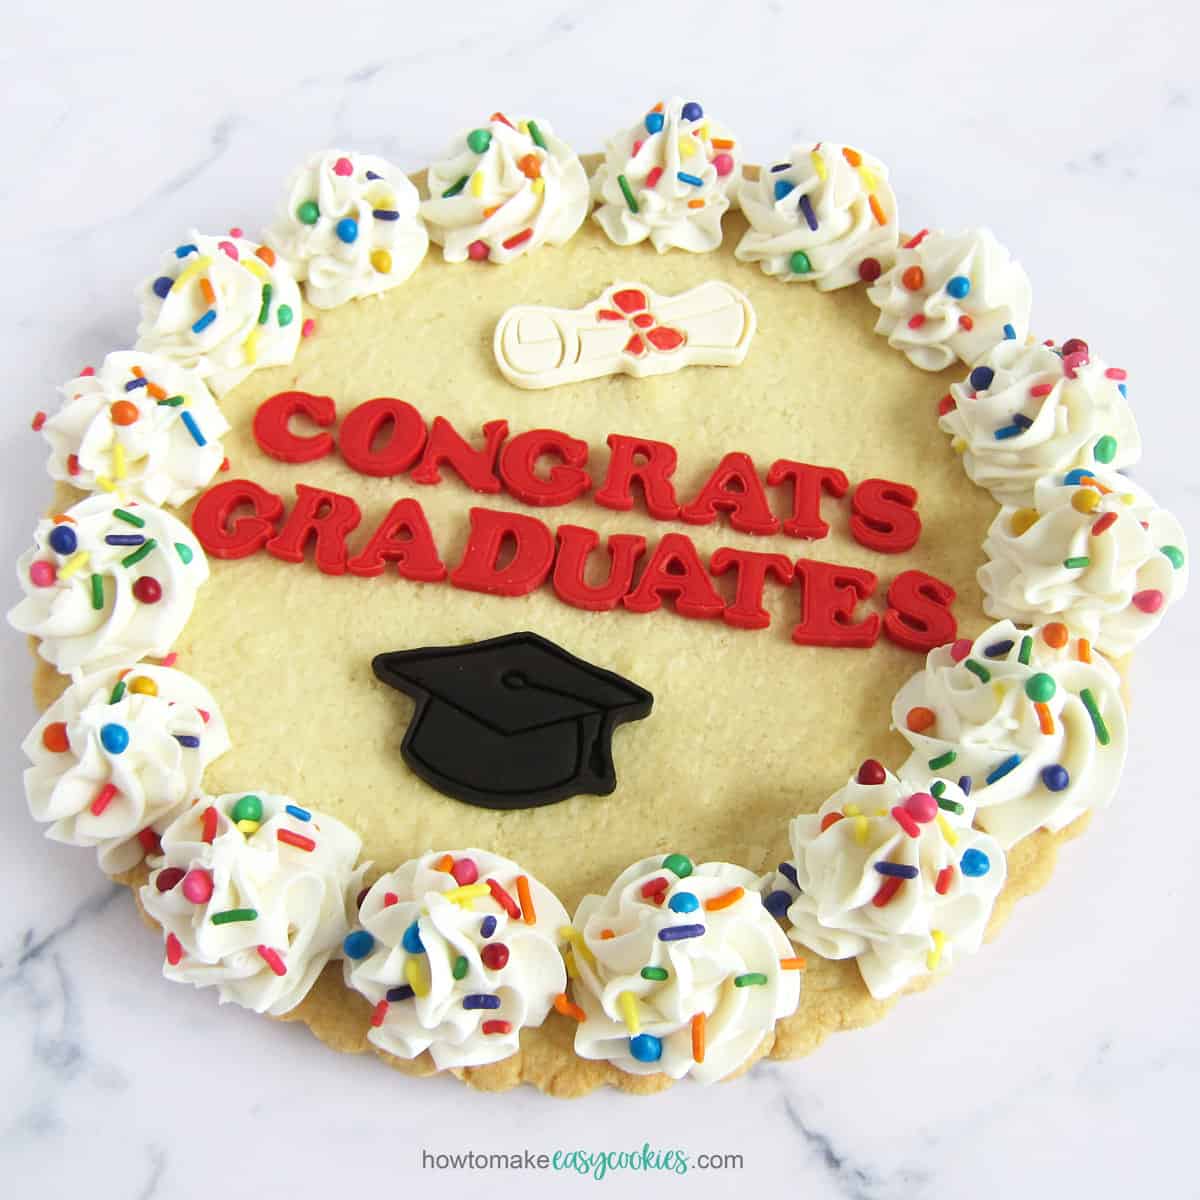 graduation cookie cake topped with cut-out letters spelling "congrats graduates" and a grad cap and diploma